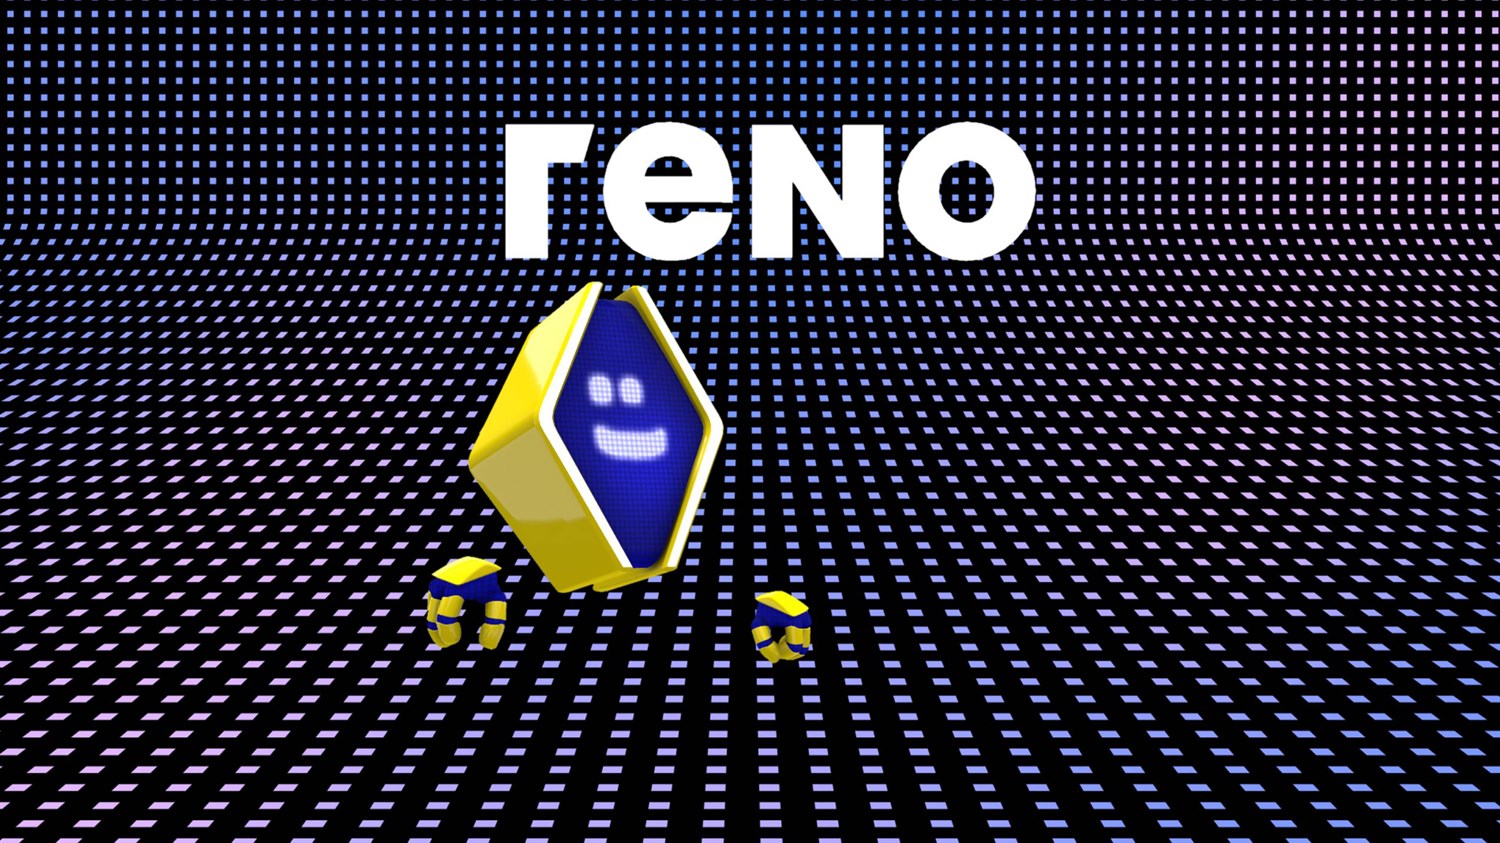 reno - official avatar - Renault